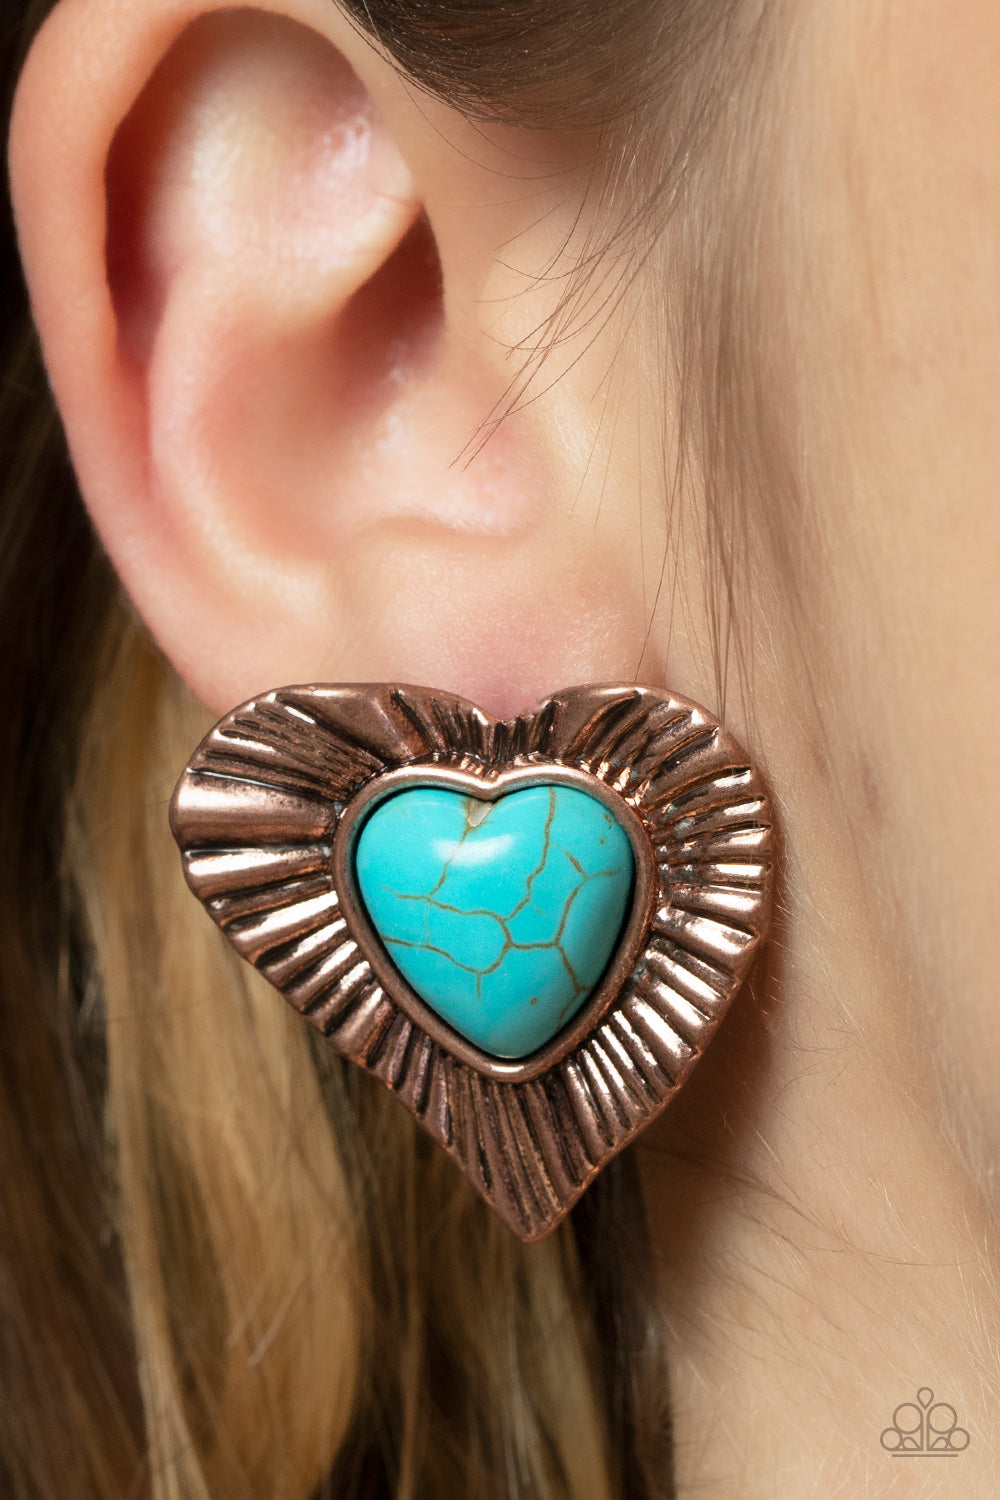 Rustic Romance Copper Post Earring - Paparazzi Accessories  Etched in rustic texture, an antiqued copper frame gathers around a heart shaped turquoise stone center, creating a romantic display. Earring attaches to a standard post fitting.  Sold as one pair of post earrings.